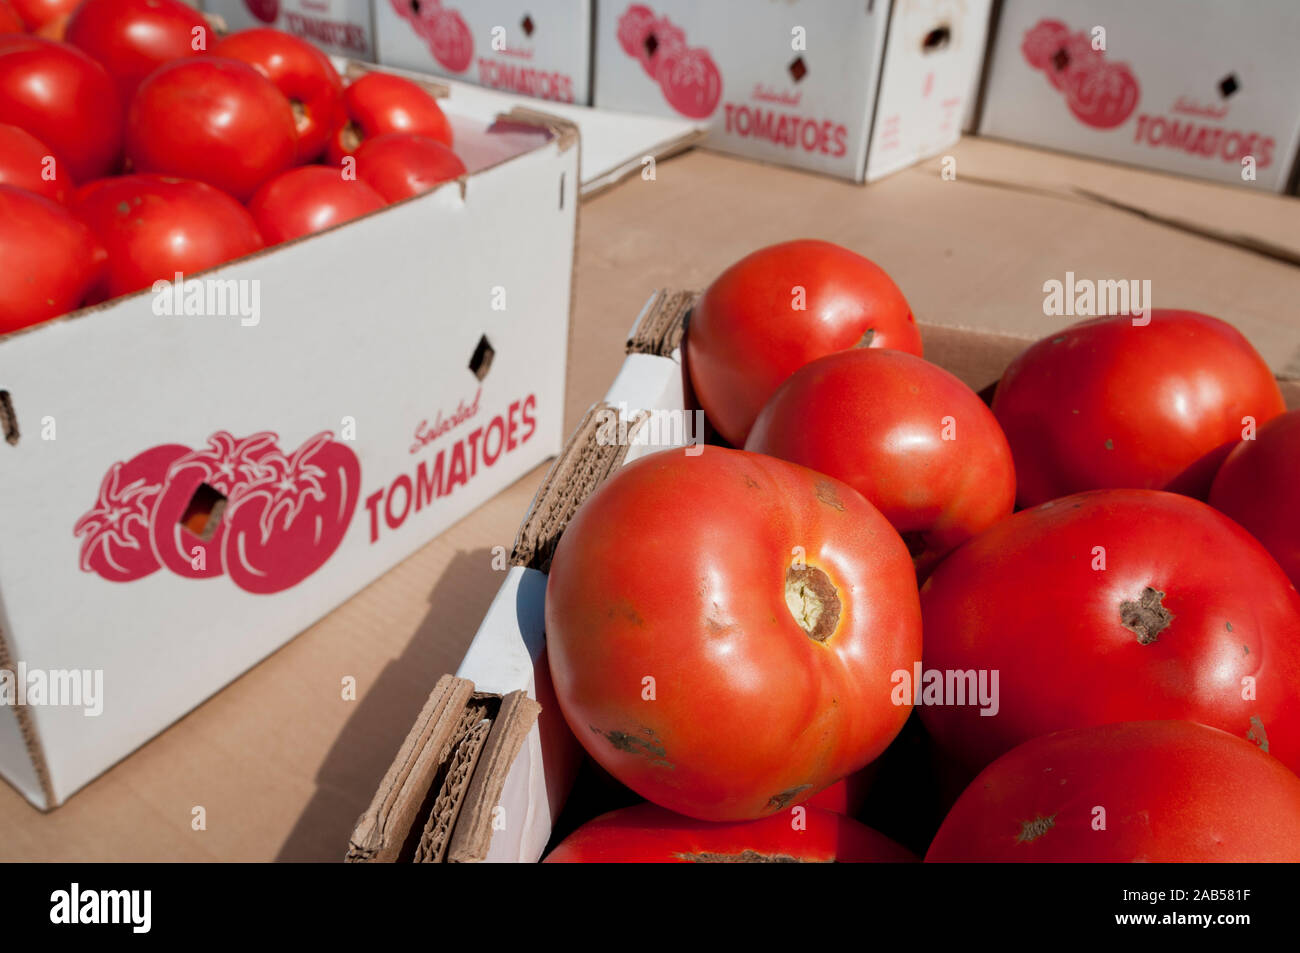 Tomatoes in generic, un-branded boxes on the back of a flatbed truck, Long Island, New York, USA. Stock Photo